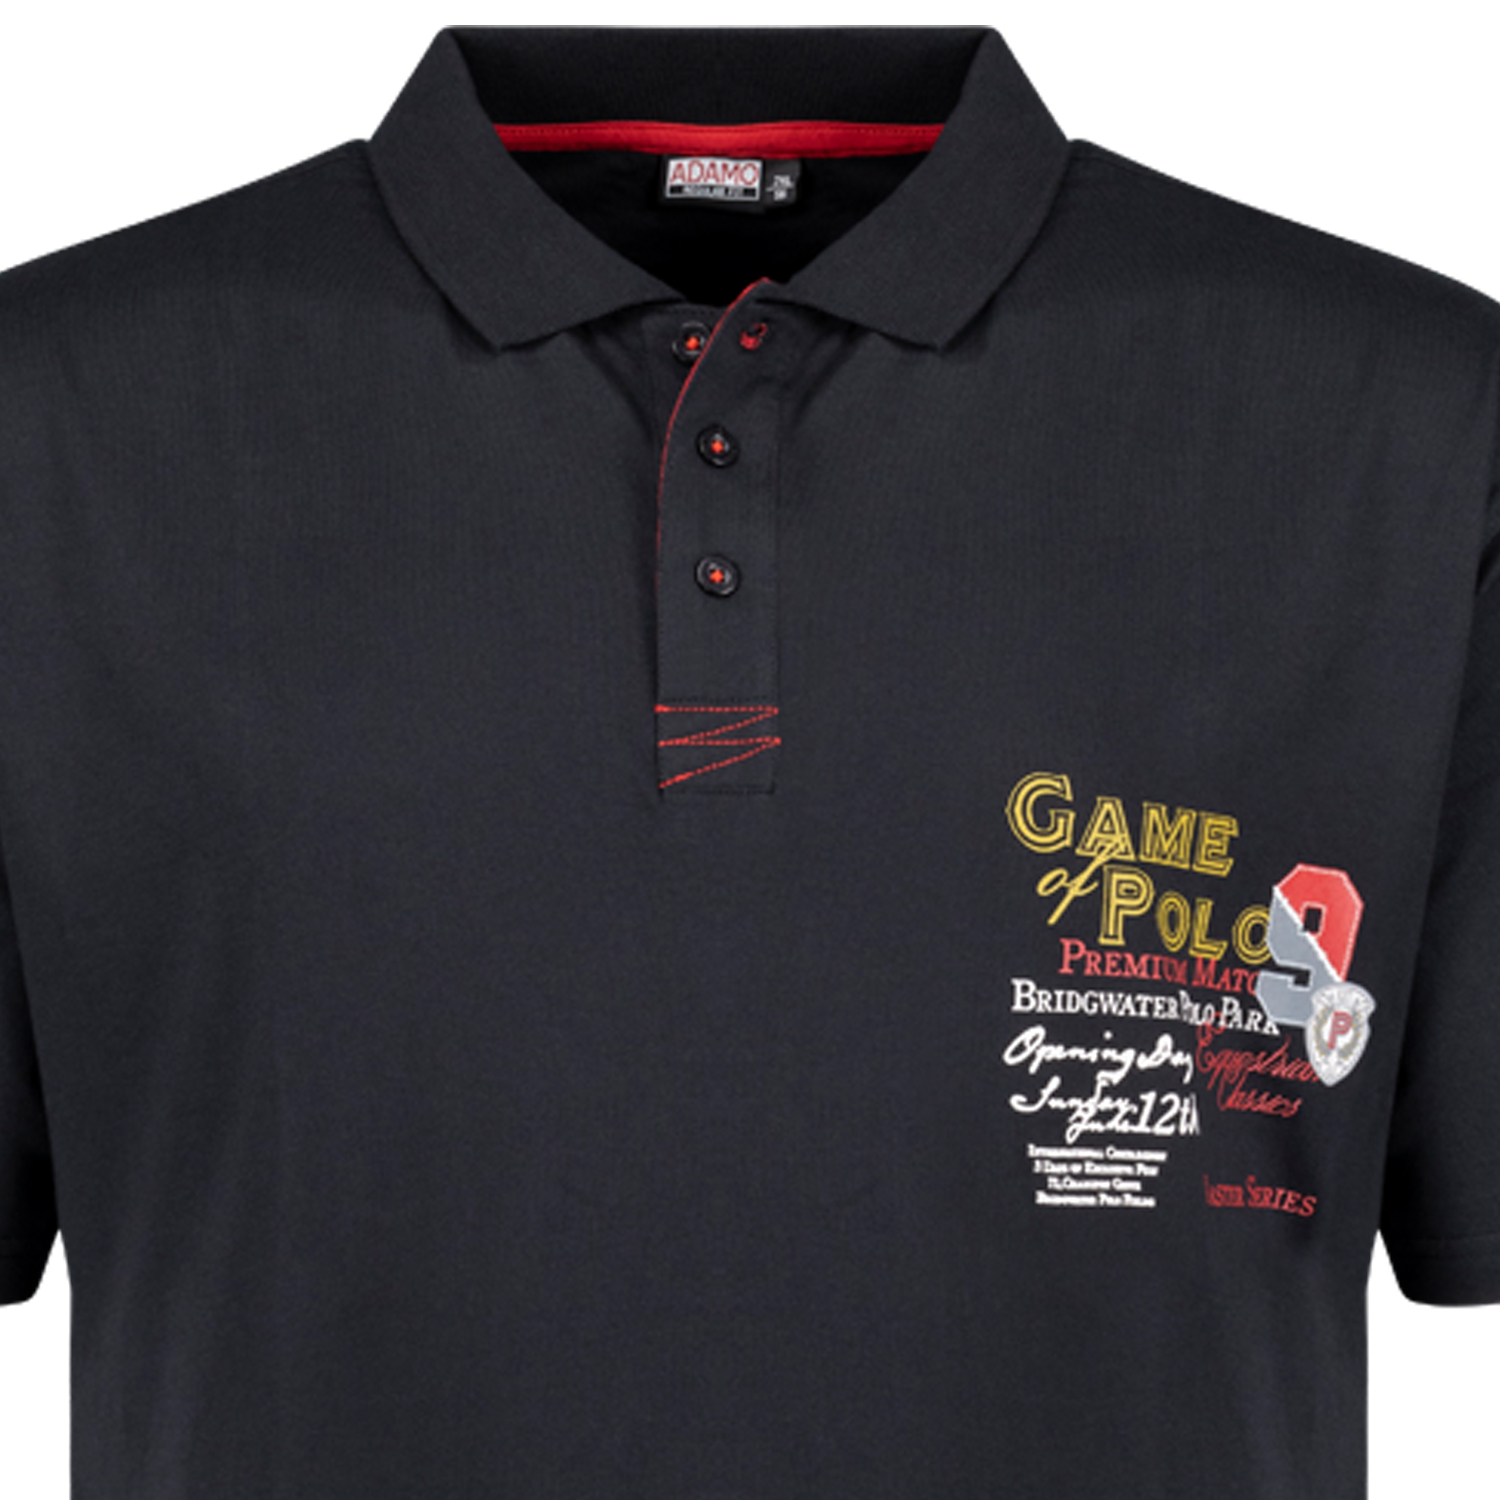 Short sleeve polo shirt with print REGULAR FIT series Perth by Adamo in black up to oversize 12XL